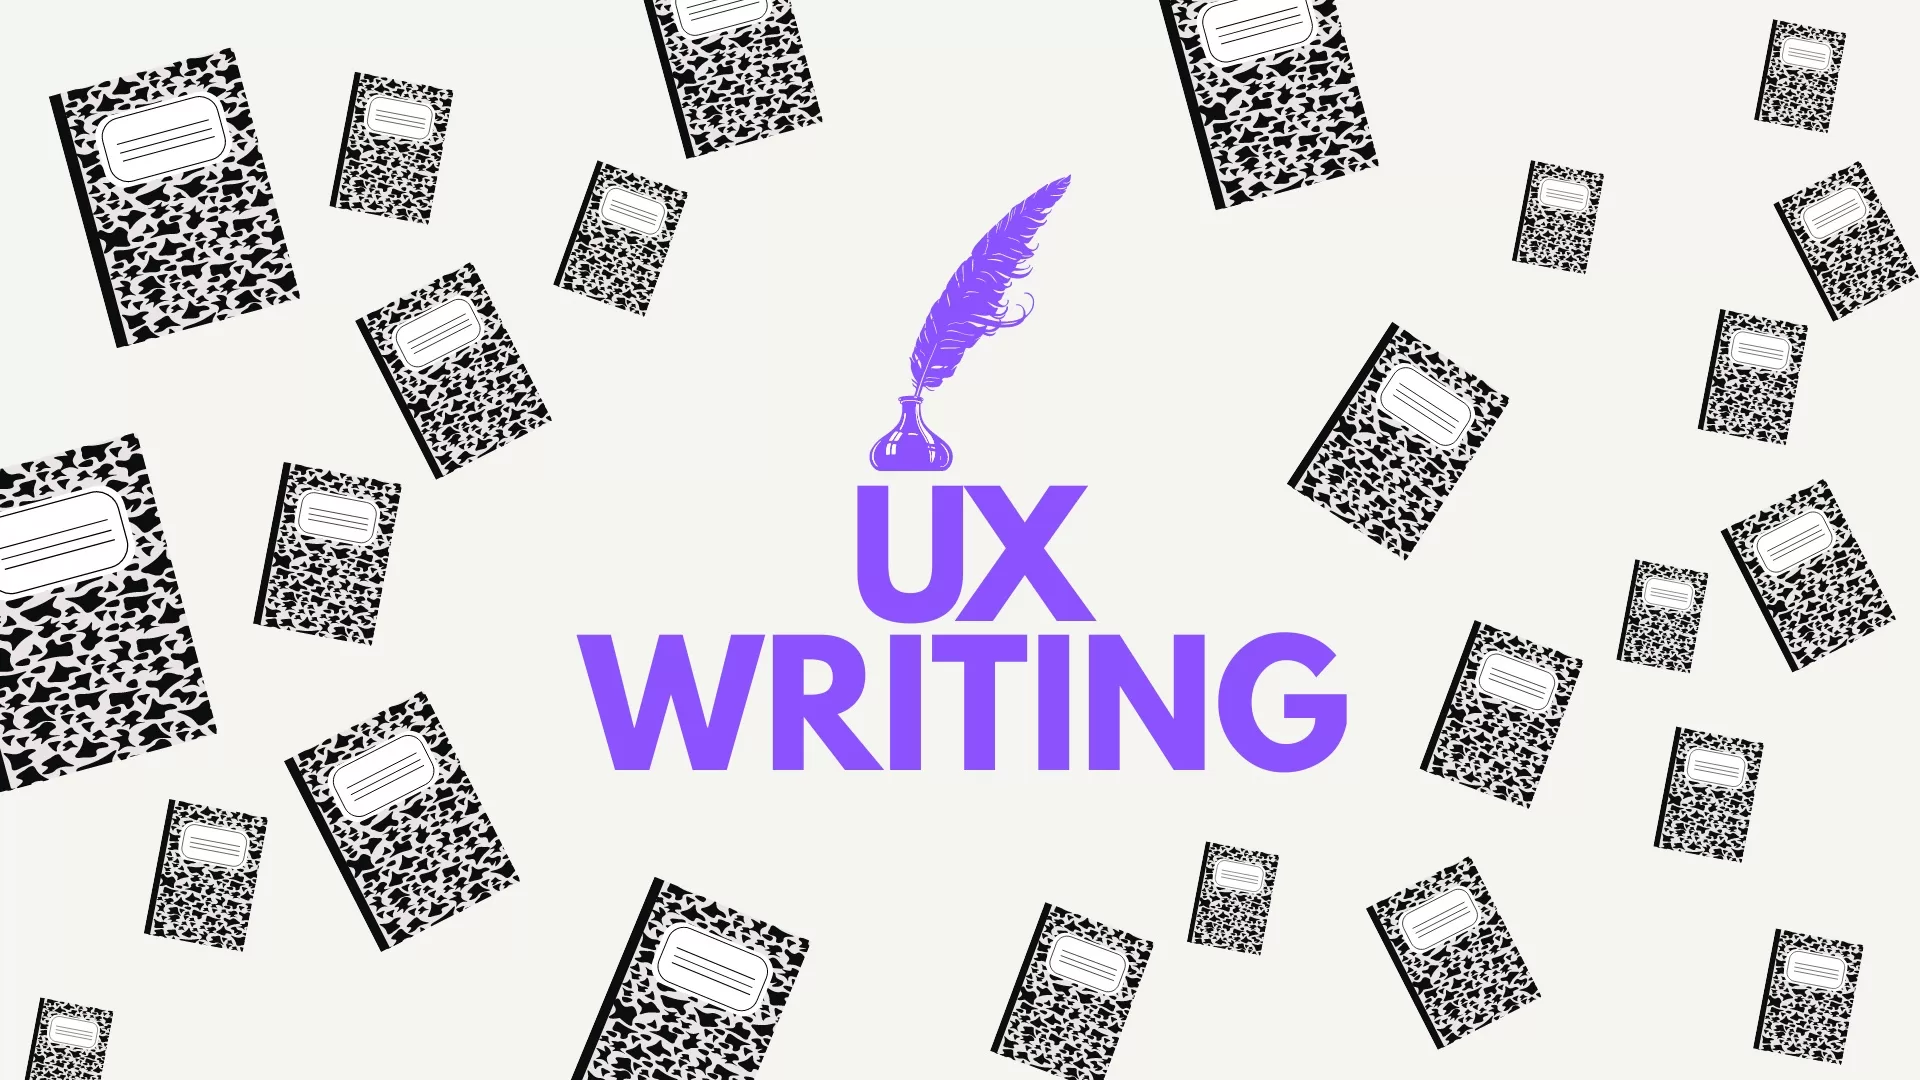 Guide to 5 best UX Writing Techniques